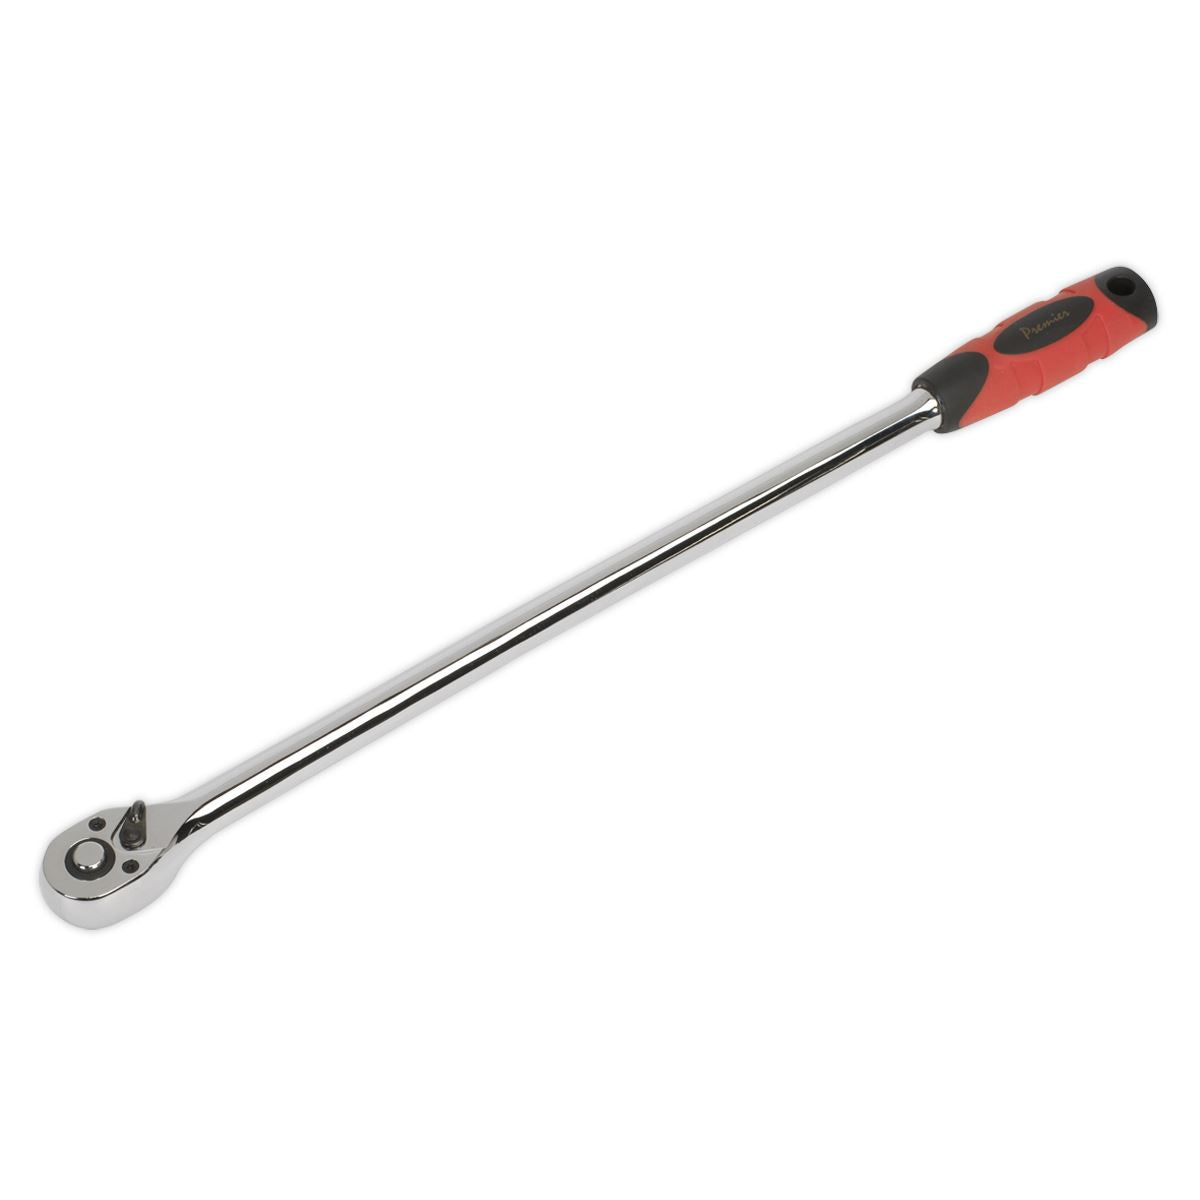 Sealey Premier Ratchet Wrench Extra-Long 435mm 3/8"Sq Drive